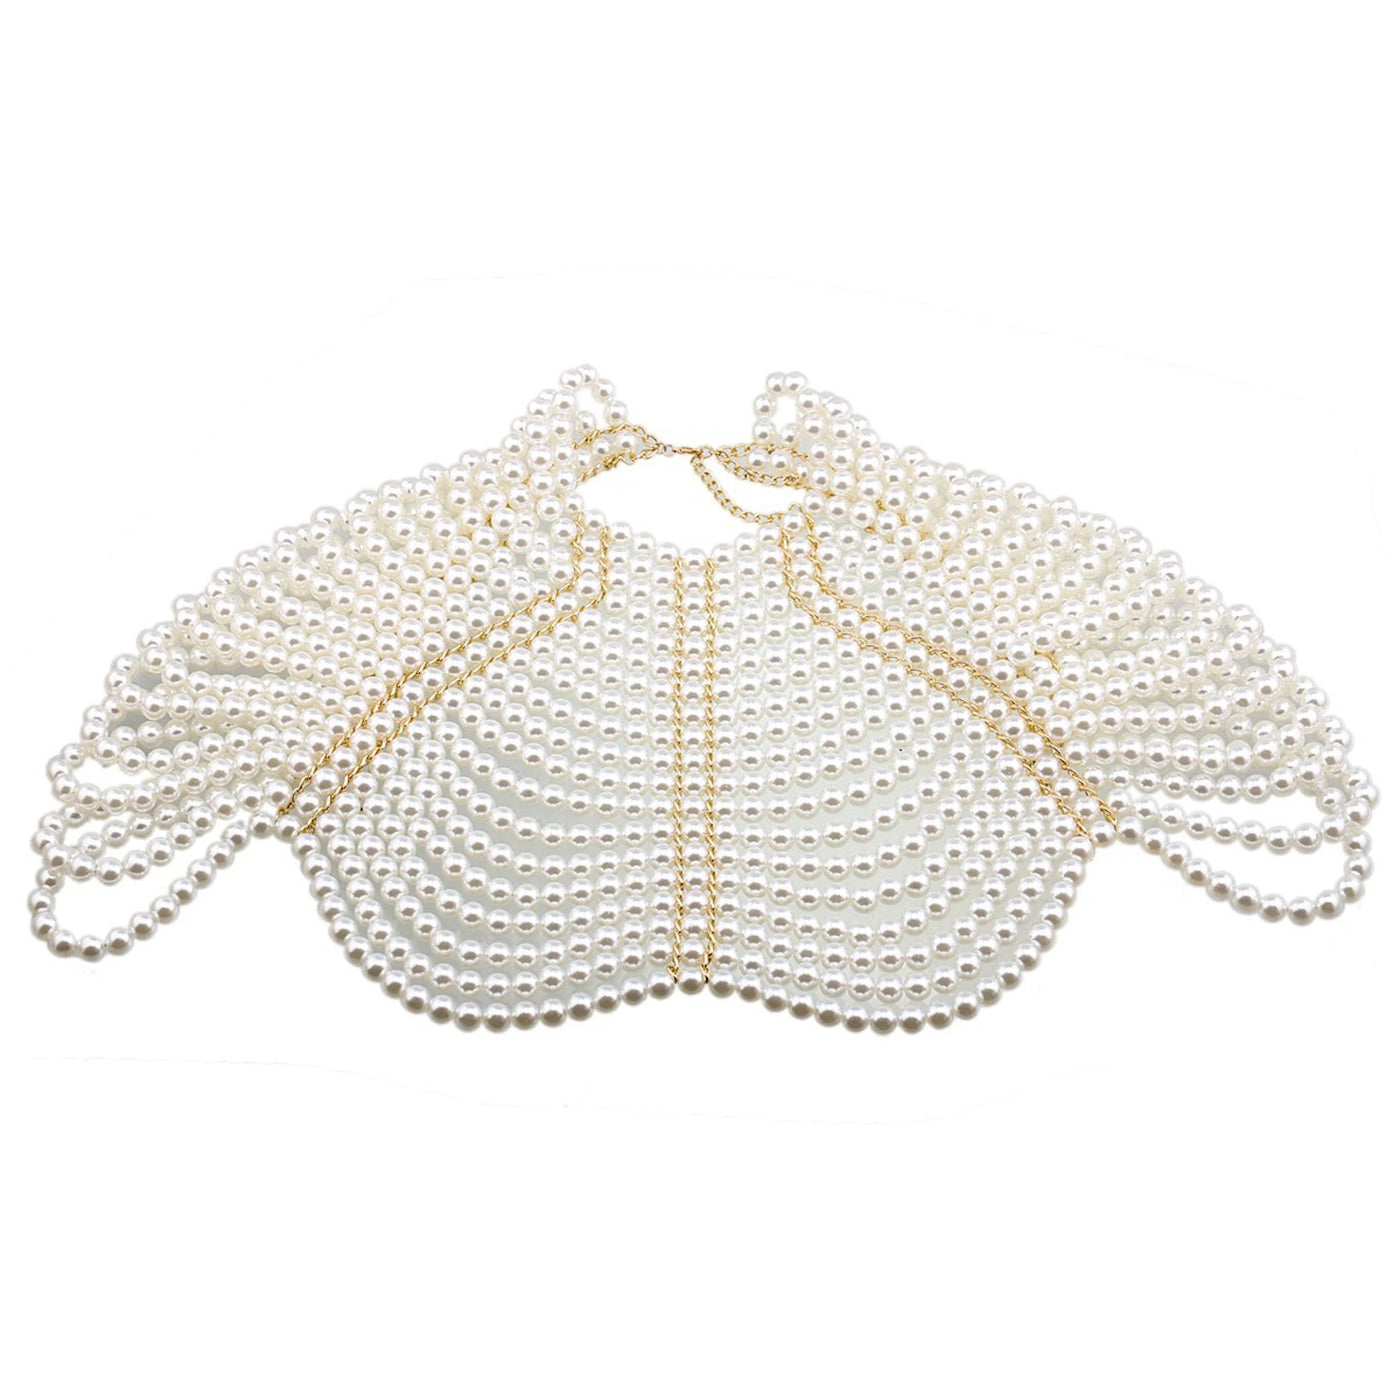 Goddess maba Pearl Necklace